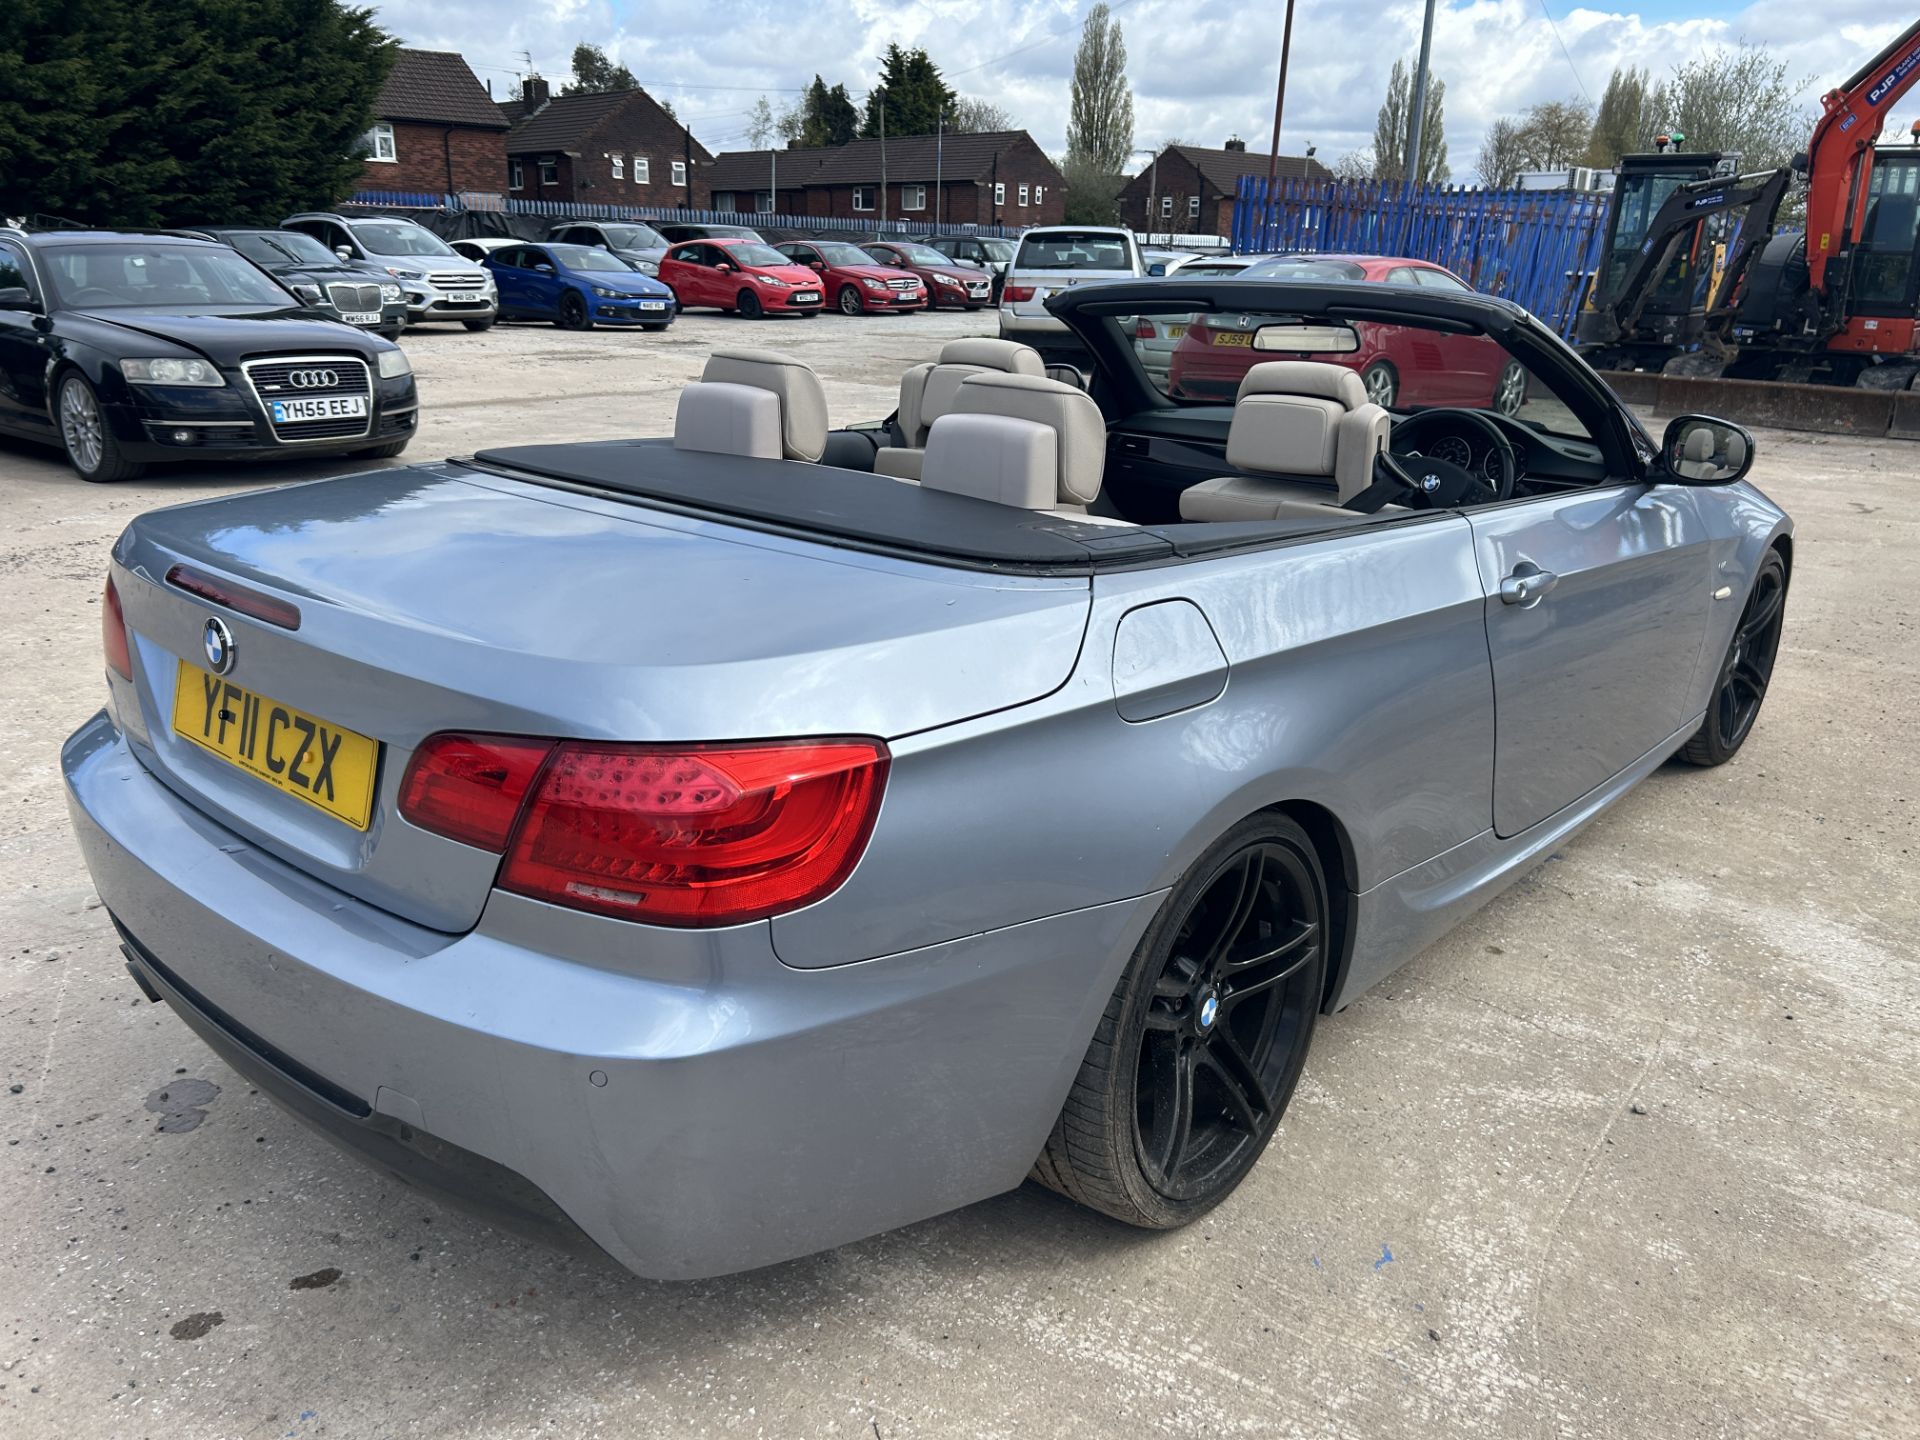 BMW 330I M Sport Auto Petrol Convertible | YF11 CZX | 61,658 Miles - Image 8 of 15